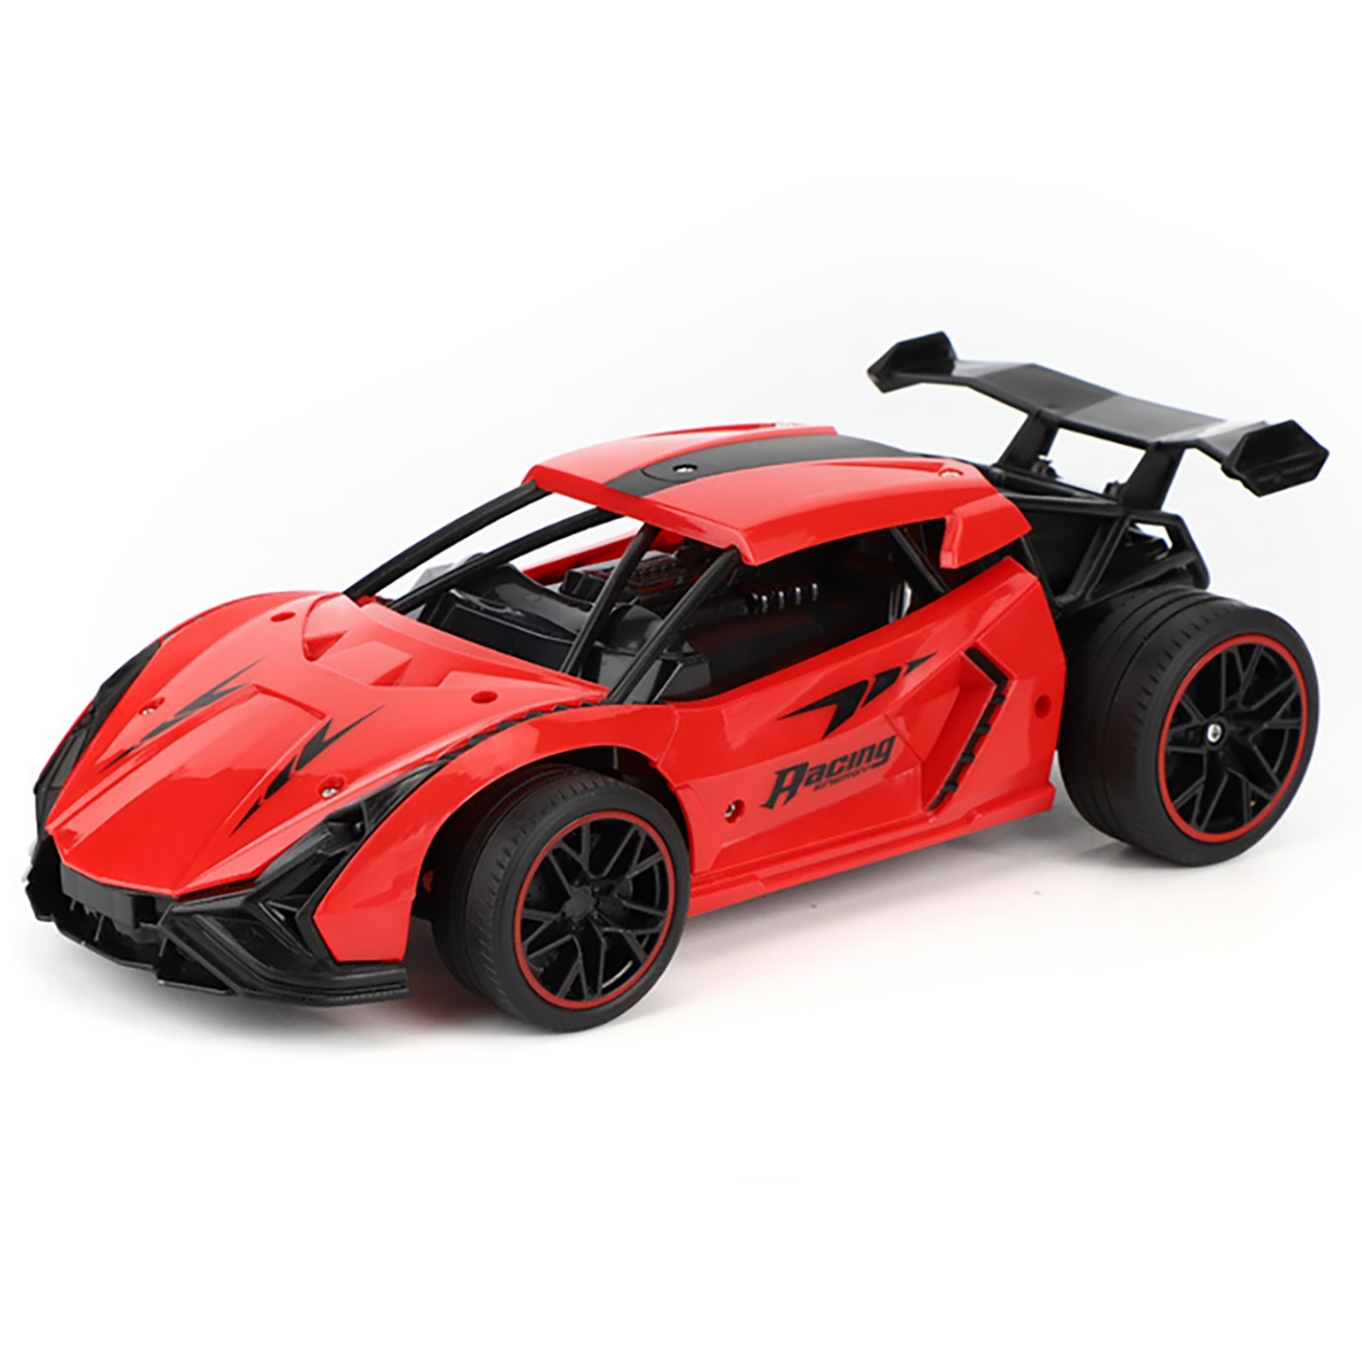 2.4G RC Car Toy 15km/h High Speed Off-Road Vehicle Remote Control Racing Car Toy For Boys Girls Birthday Christmas Gifts